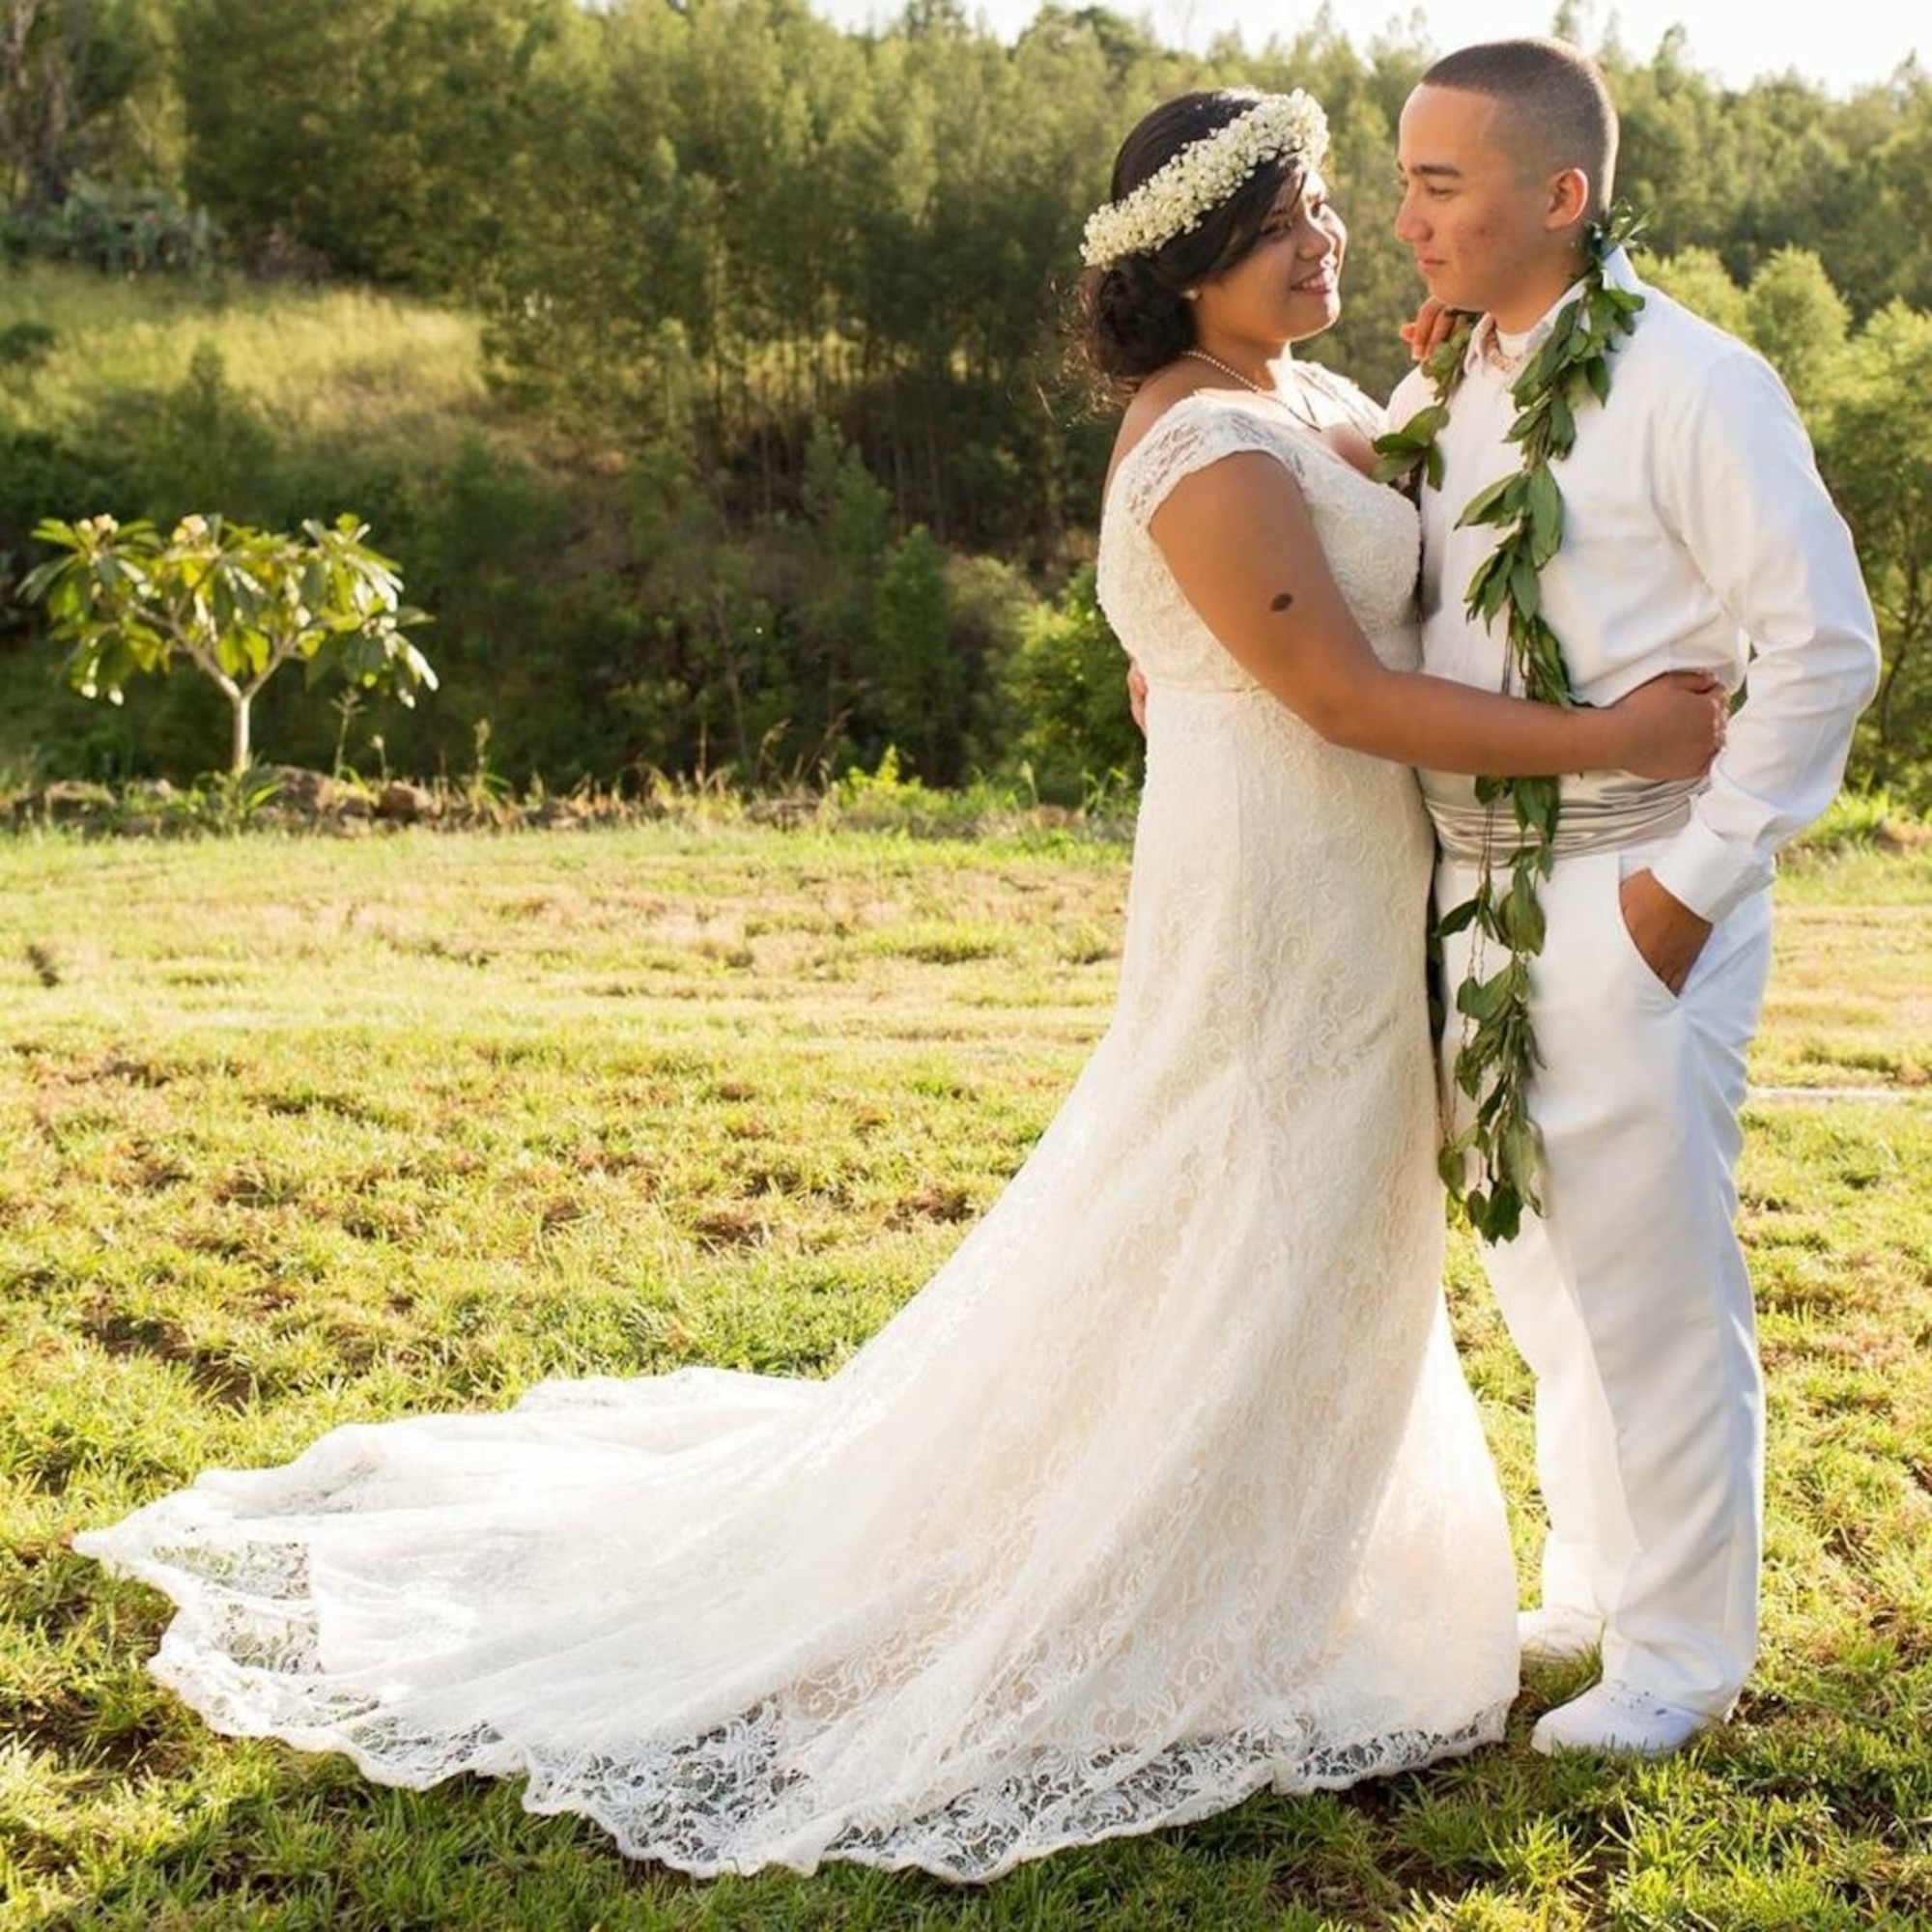 Senior Airman Kaiea Hokoana, 90th Security Forces Squadron installation patrolman, and Airman 1st Class Veulah Hokoana, 90th Force Support Squadron missile chef, pose for a wedding photo in Kula, Hawaii, Oct. 8, 2016. A week prior to the Hokoanas’ wedding, they provided lifesaving assistance to a motorcyclist injured in an accident which contributed to saving the man’s life. Kaiea received the Air Force Commendation Medal for his actions during an award ceremony in Cheyenne, Wyo., July 14, 2017. (U.S. Air Force courtesy photo) 